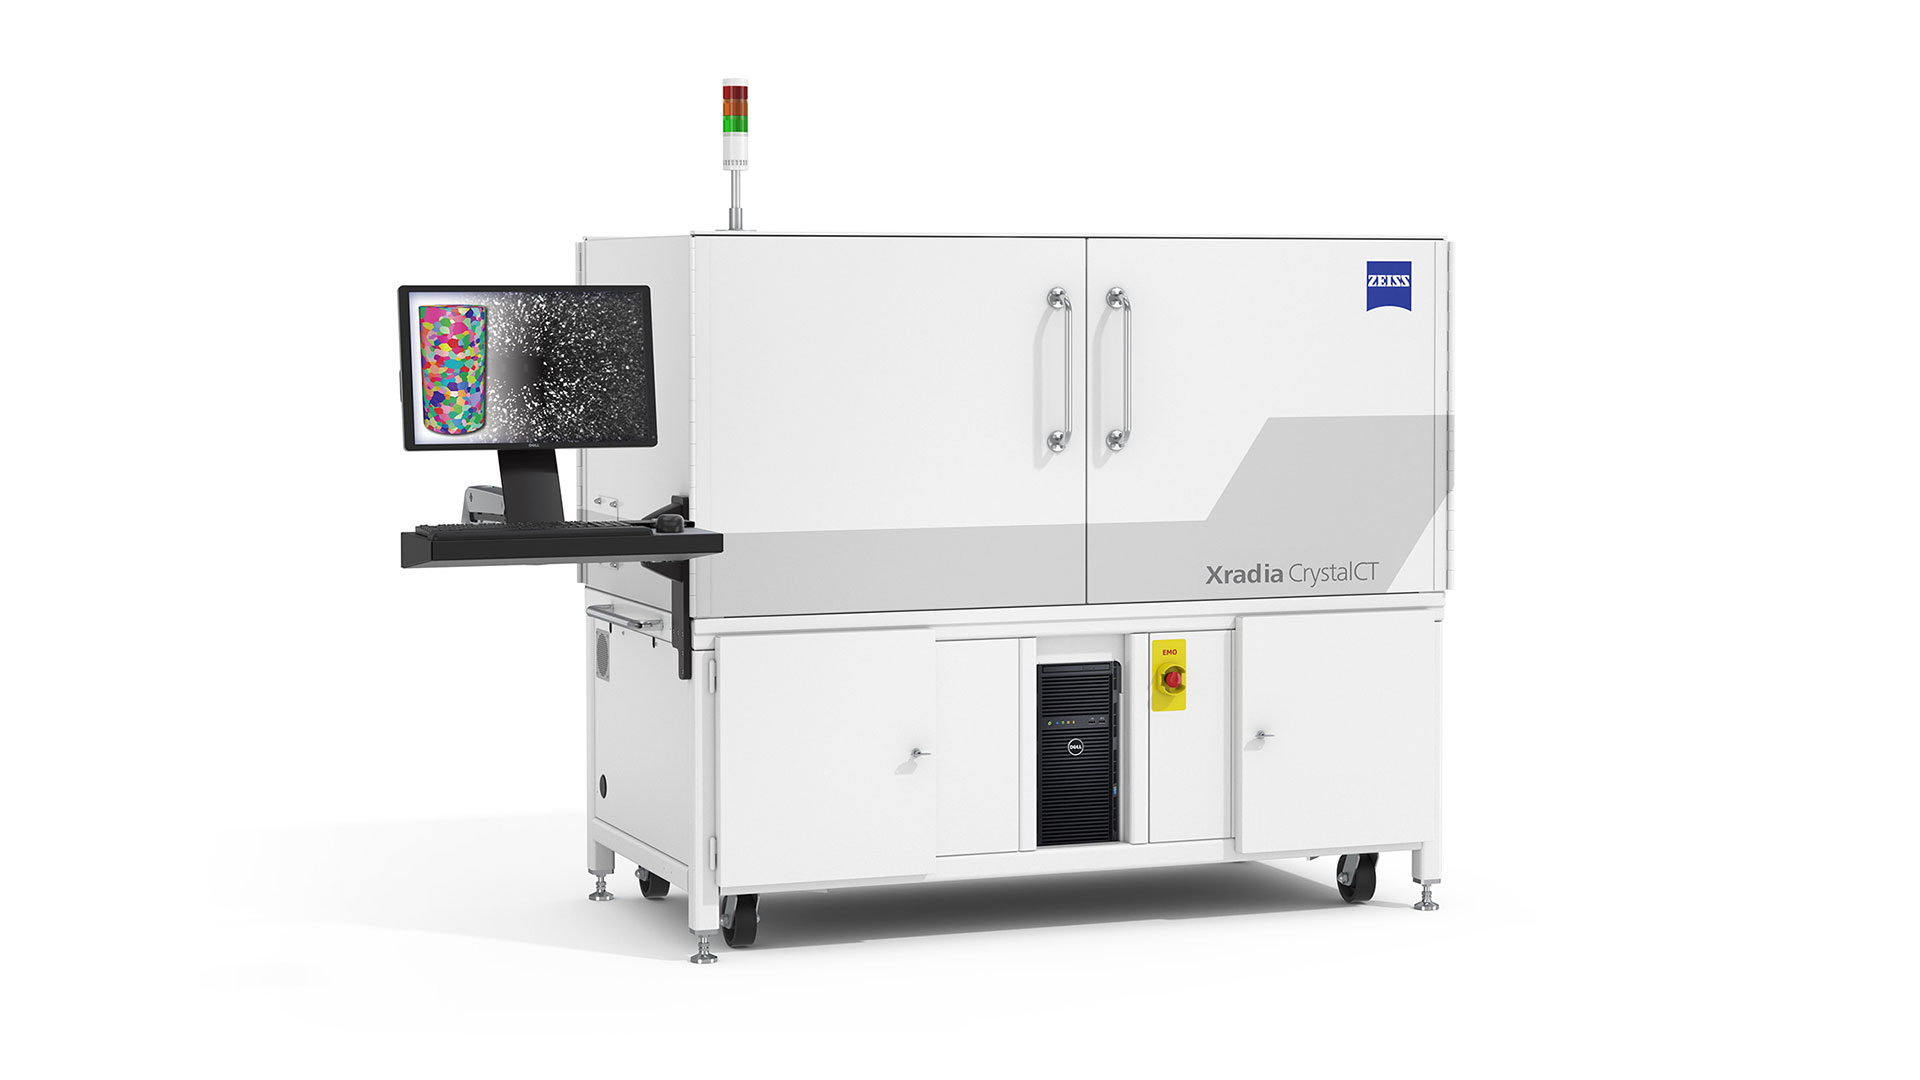 ZEISS Xradia CrystalCT is the world’s first commercially built laboratory diffraction contrast tomography (DCT) on a microCT.